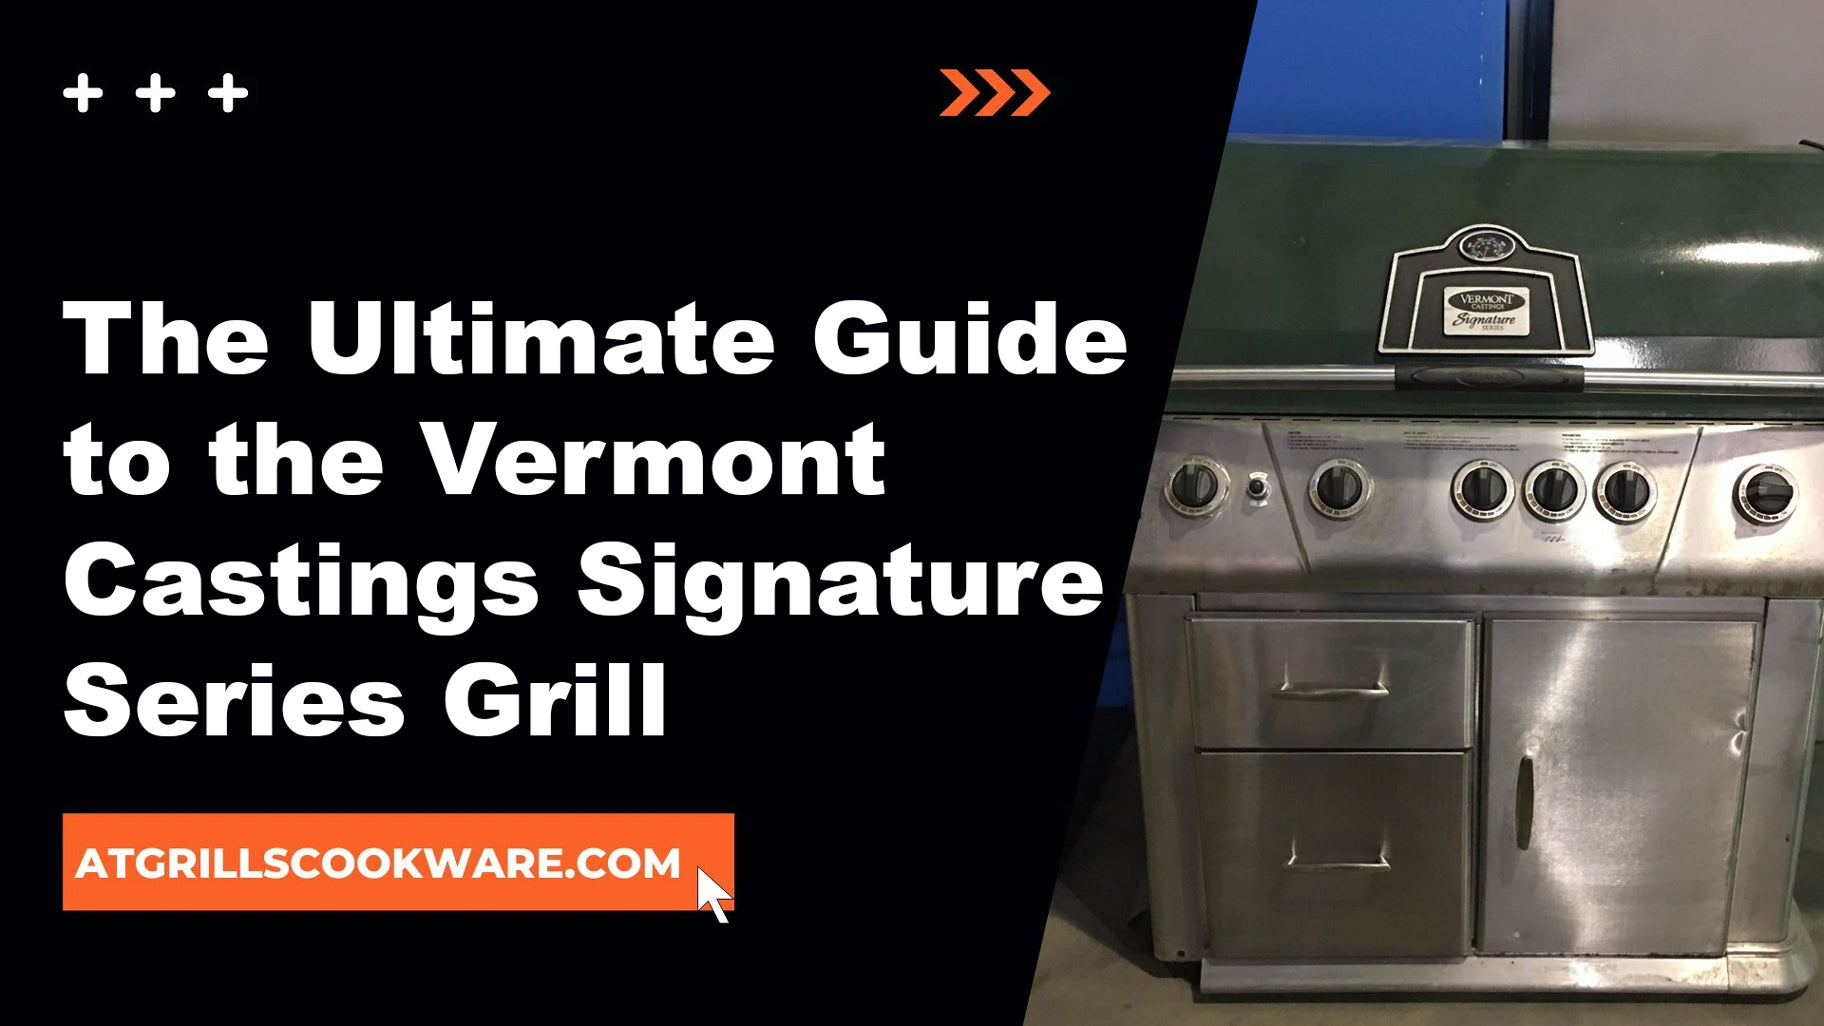 The Ultimate Guide to the Vermont Castings Signature Series Grill